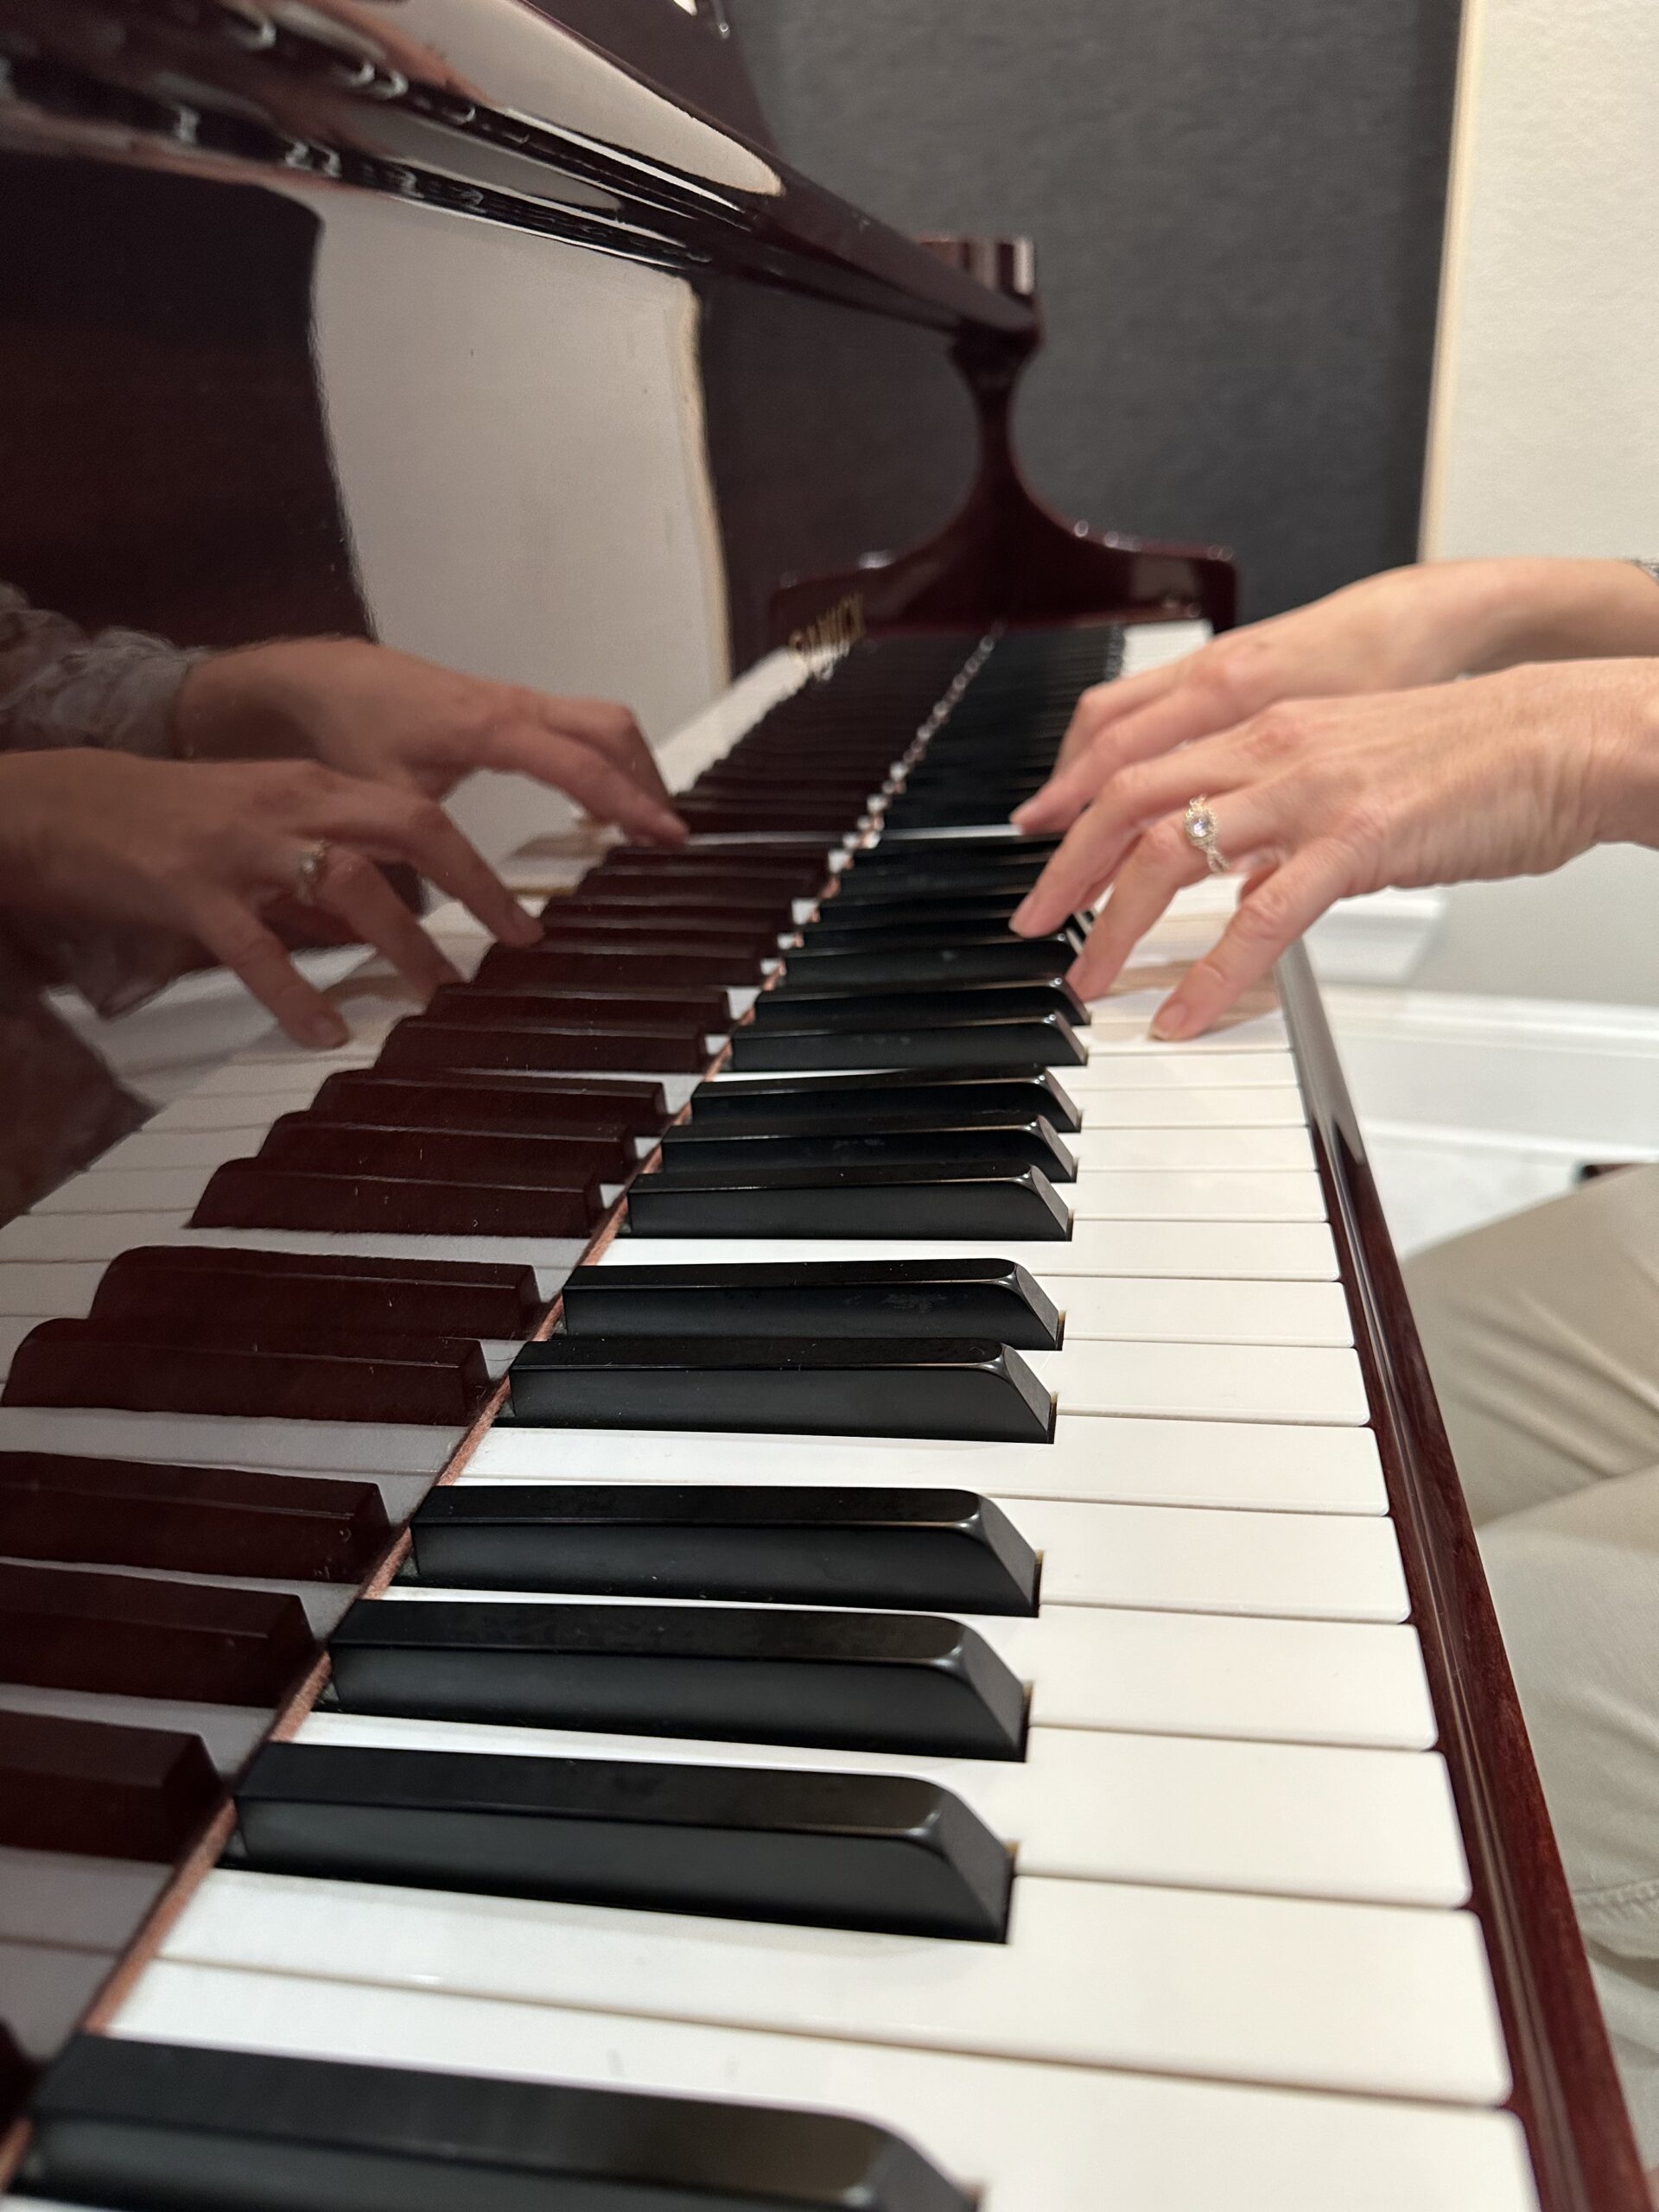 Hands on Piano